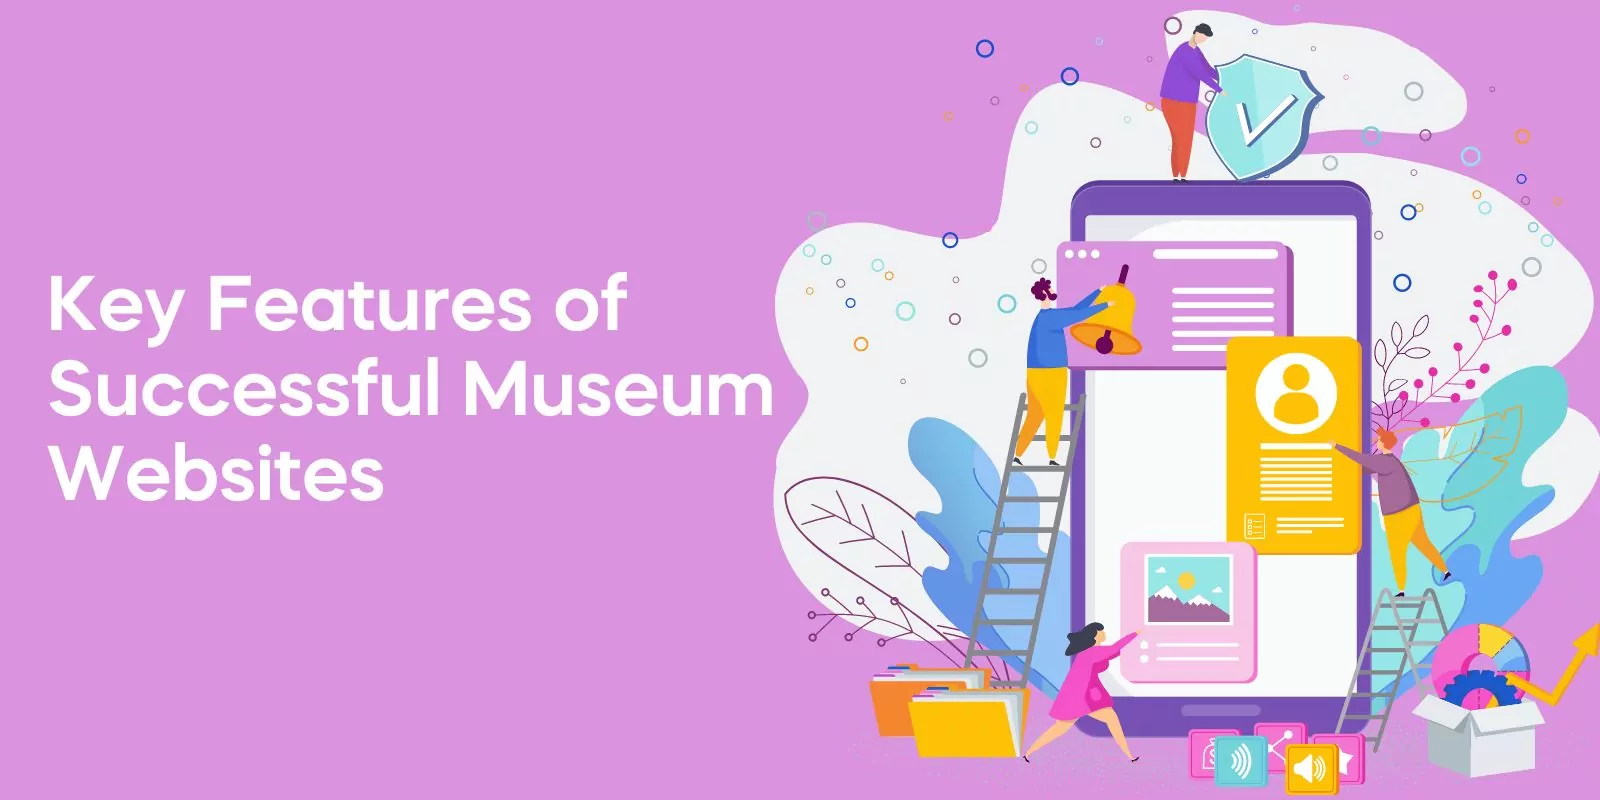 Key Features of Successful Museum Websites